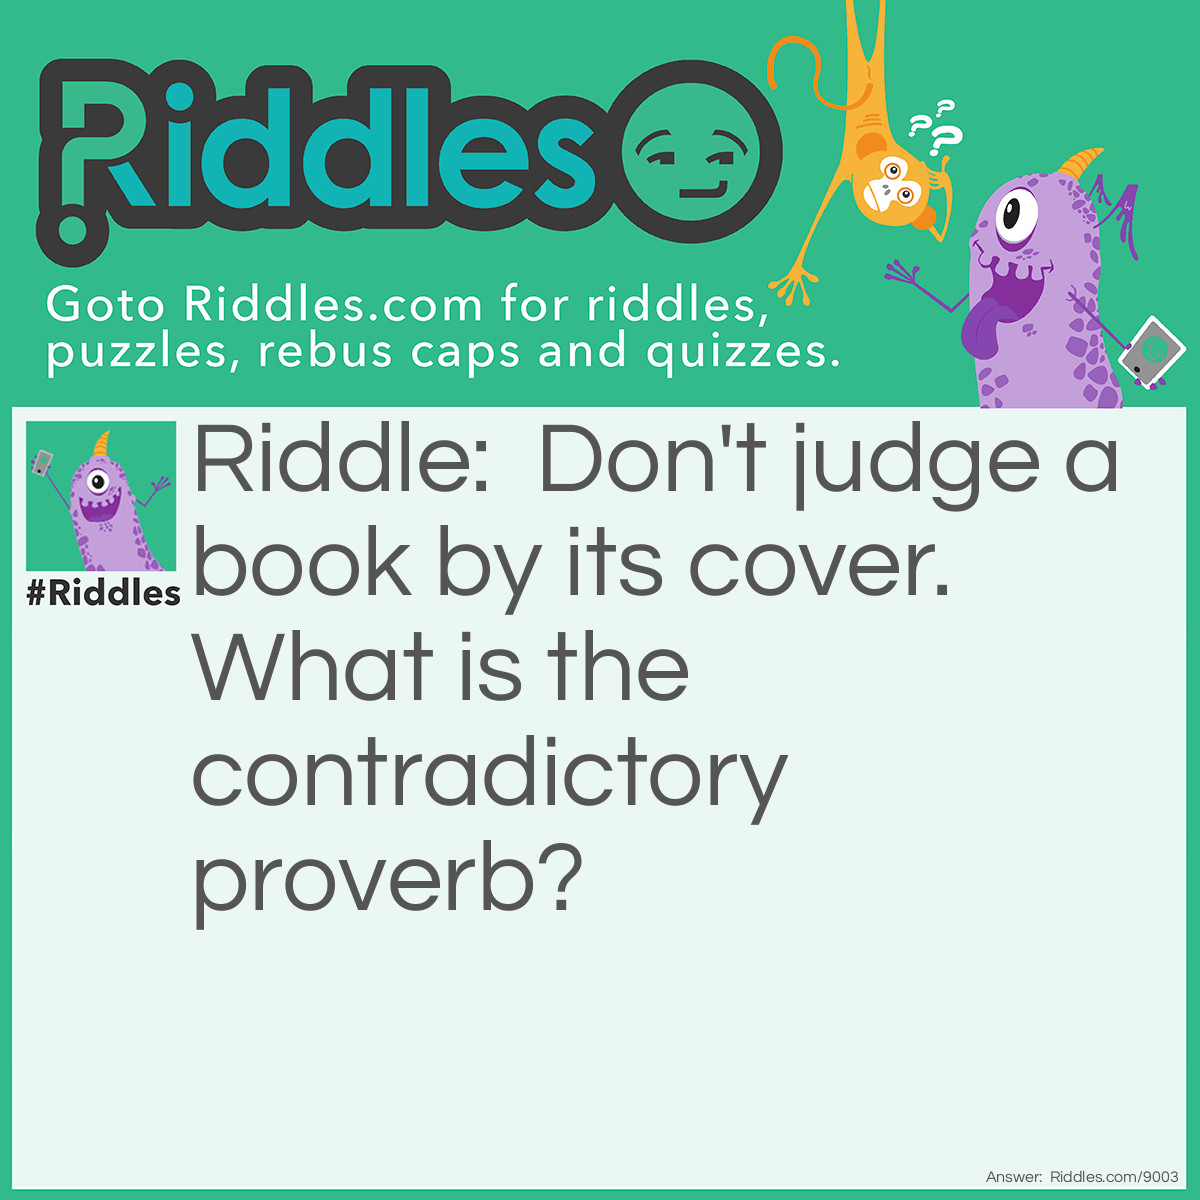 Riddle: Don't judge a book by its cover. What is the contradictory proverb? Answer: Clothes make the man.